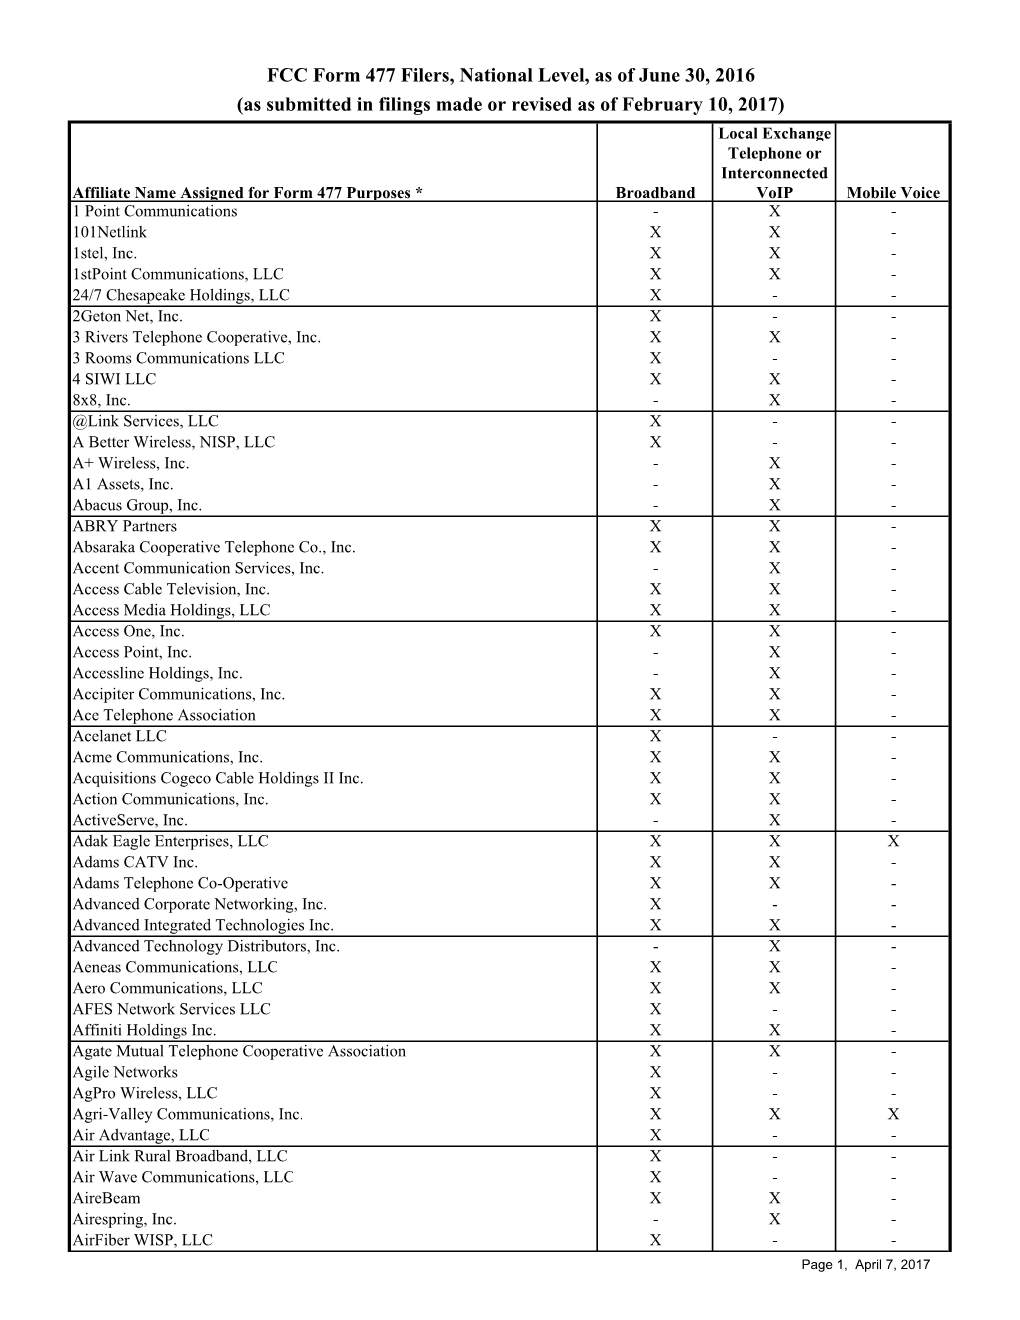 FCC Form 477 Filers, National Level, As of June 30, 2016 (As Submitted